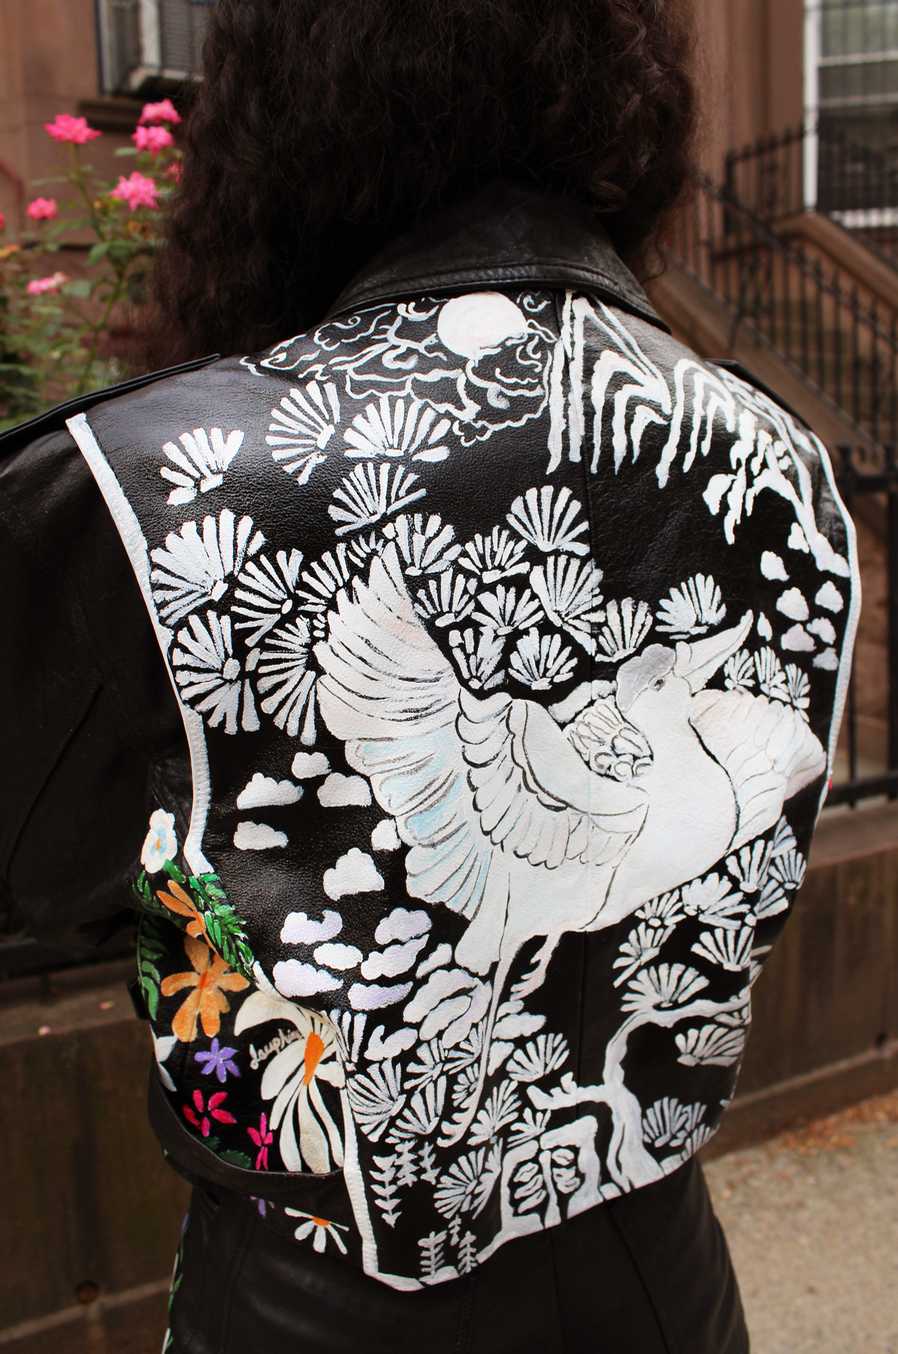 Fully hand-painted black motorcycle jacket dating from the 1980s. Floral scrapbook imagery to front, inspired by vintage pressed botanical prints. Pearl powder infused, crane-painted backside, modeled after antique mother-of-pearl inlaid cabinetry. Cropped style with silver hardware and adjustable belt